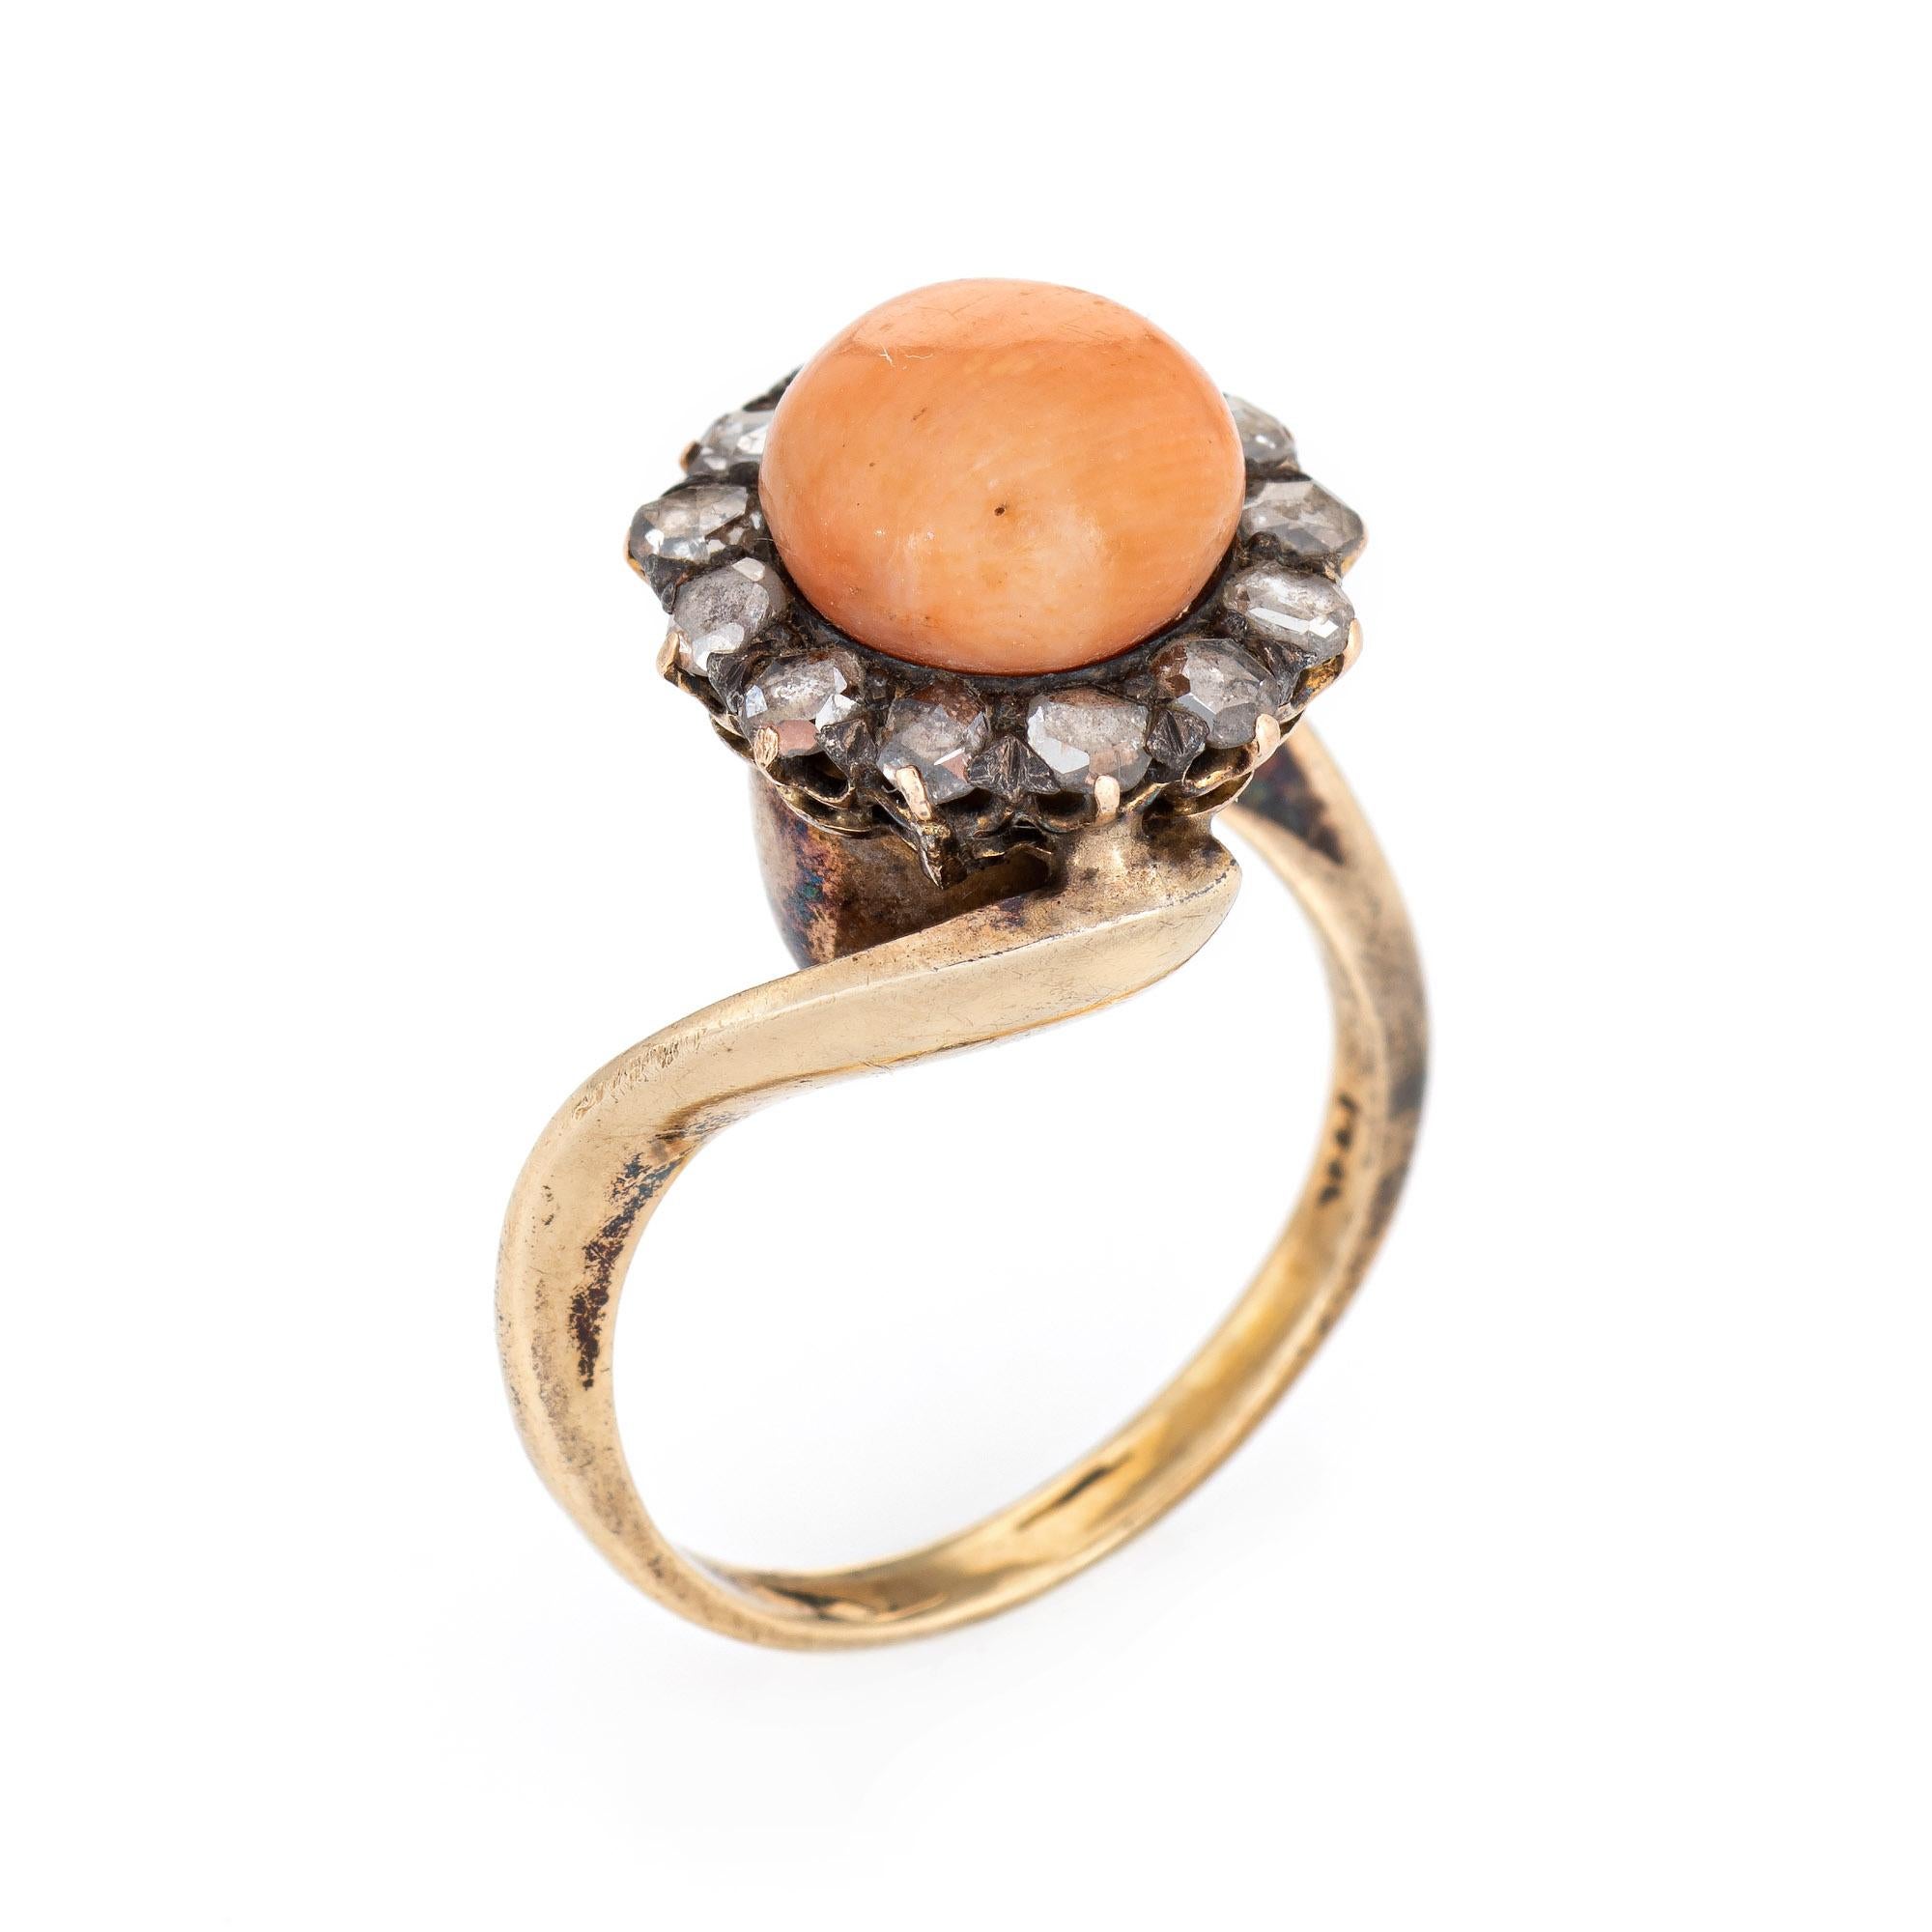 Stylish vintage coral ring (circa 1880s to 1900s) crafted in 14 karat yellow gold. 

Cabochon cut coral measures 9mm, accented with 13 estimated 0.05 carat old rose cut diamonds. The total diamond weight is estimated 0.65 carats (estimated at K-L